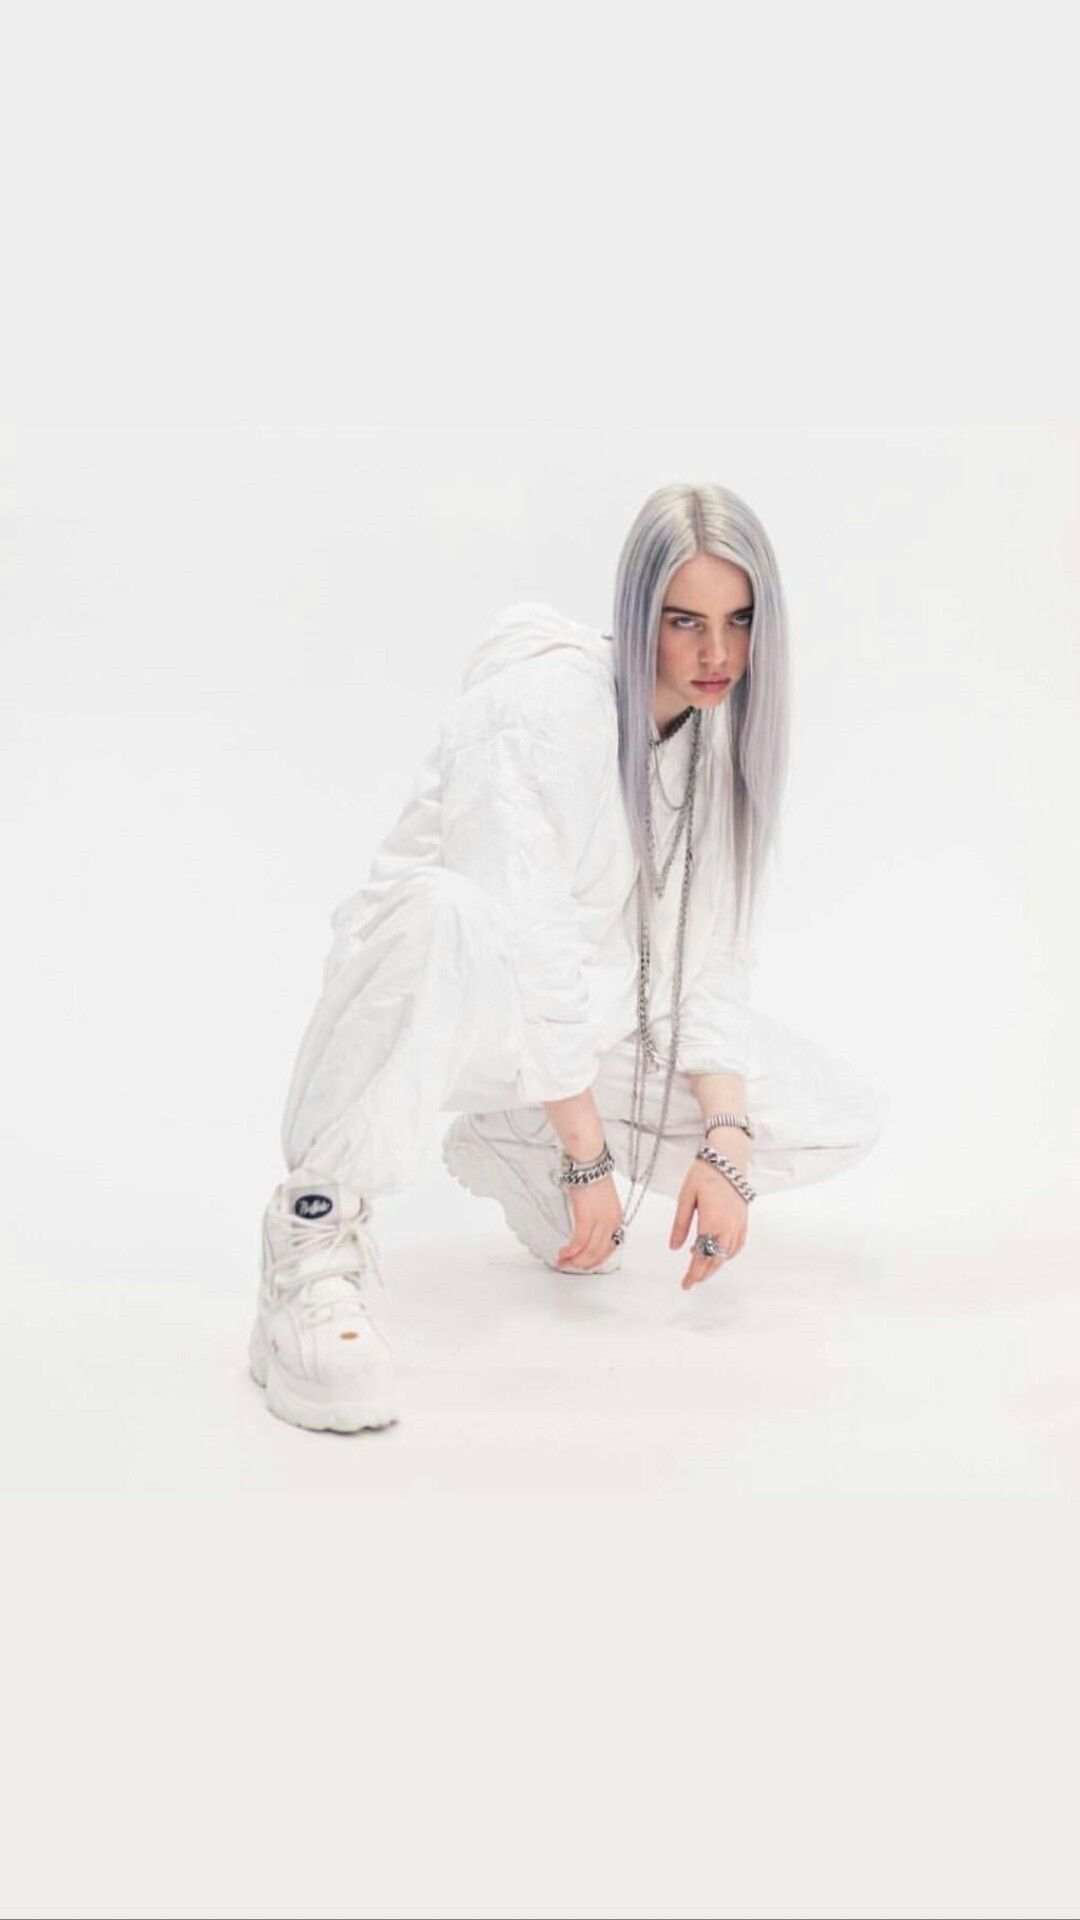 A person with white hair and sneakers - Billie Eilish